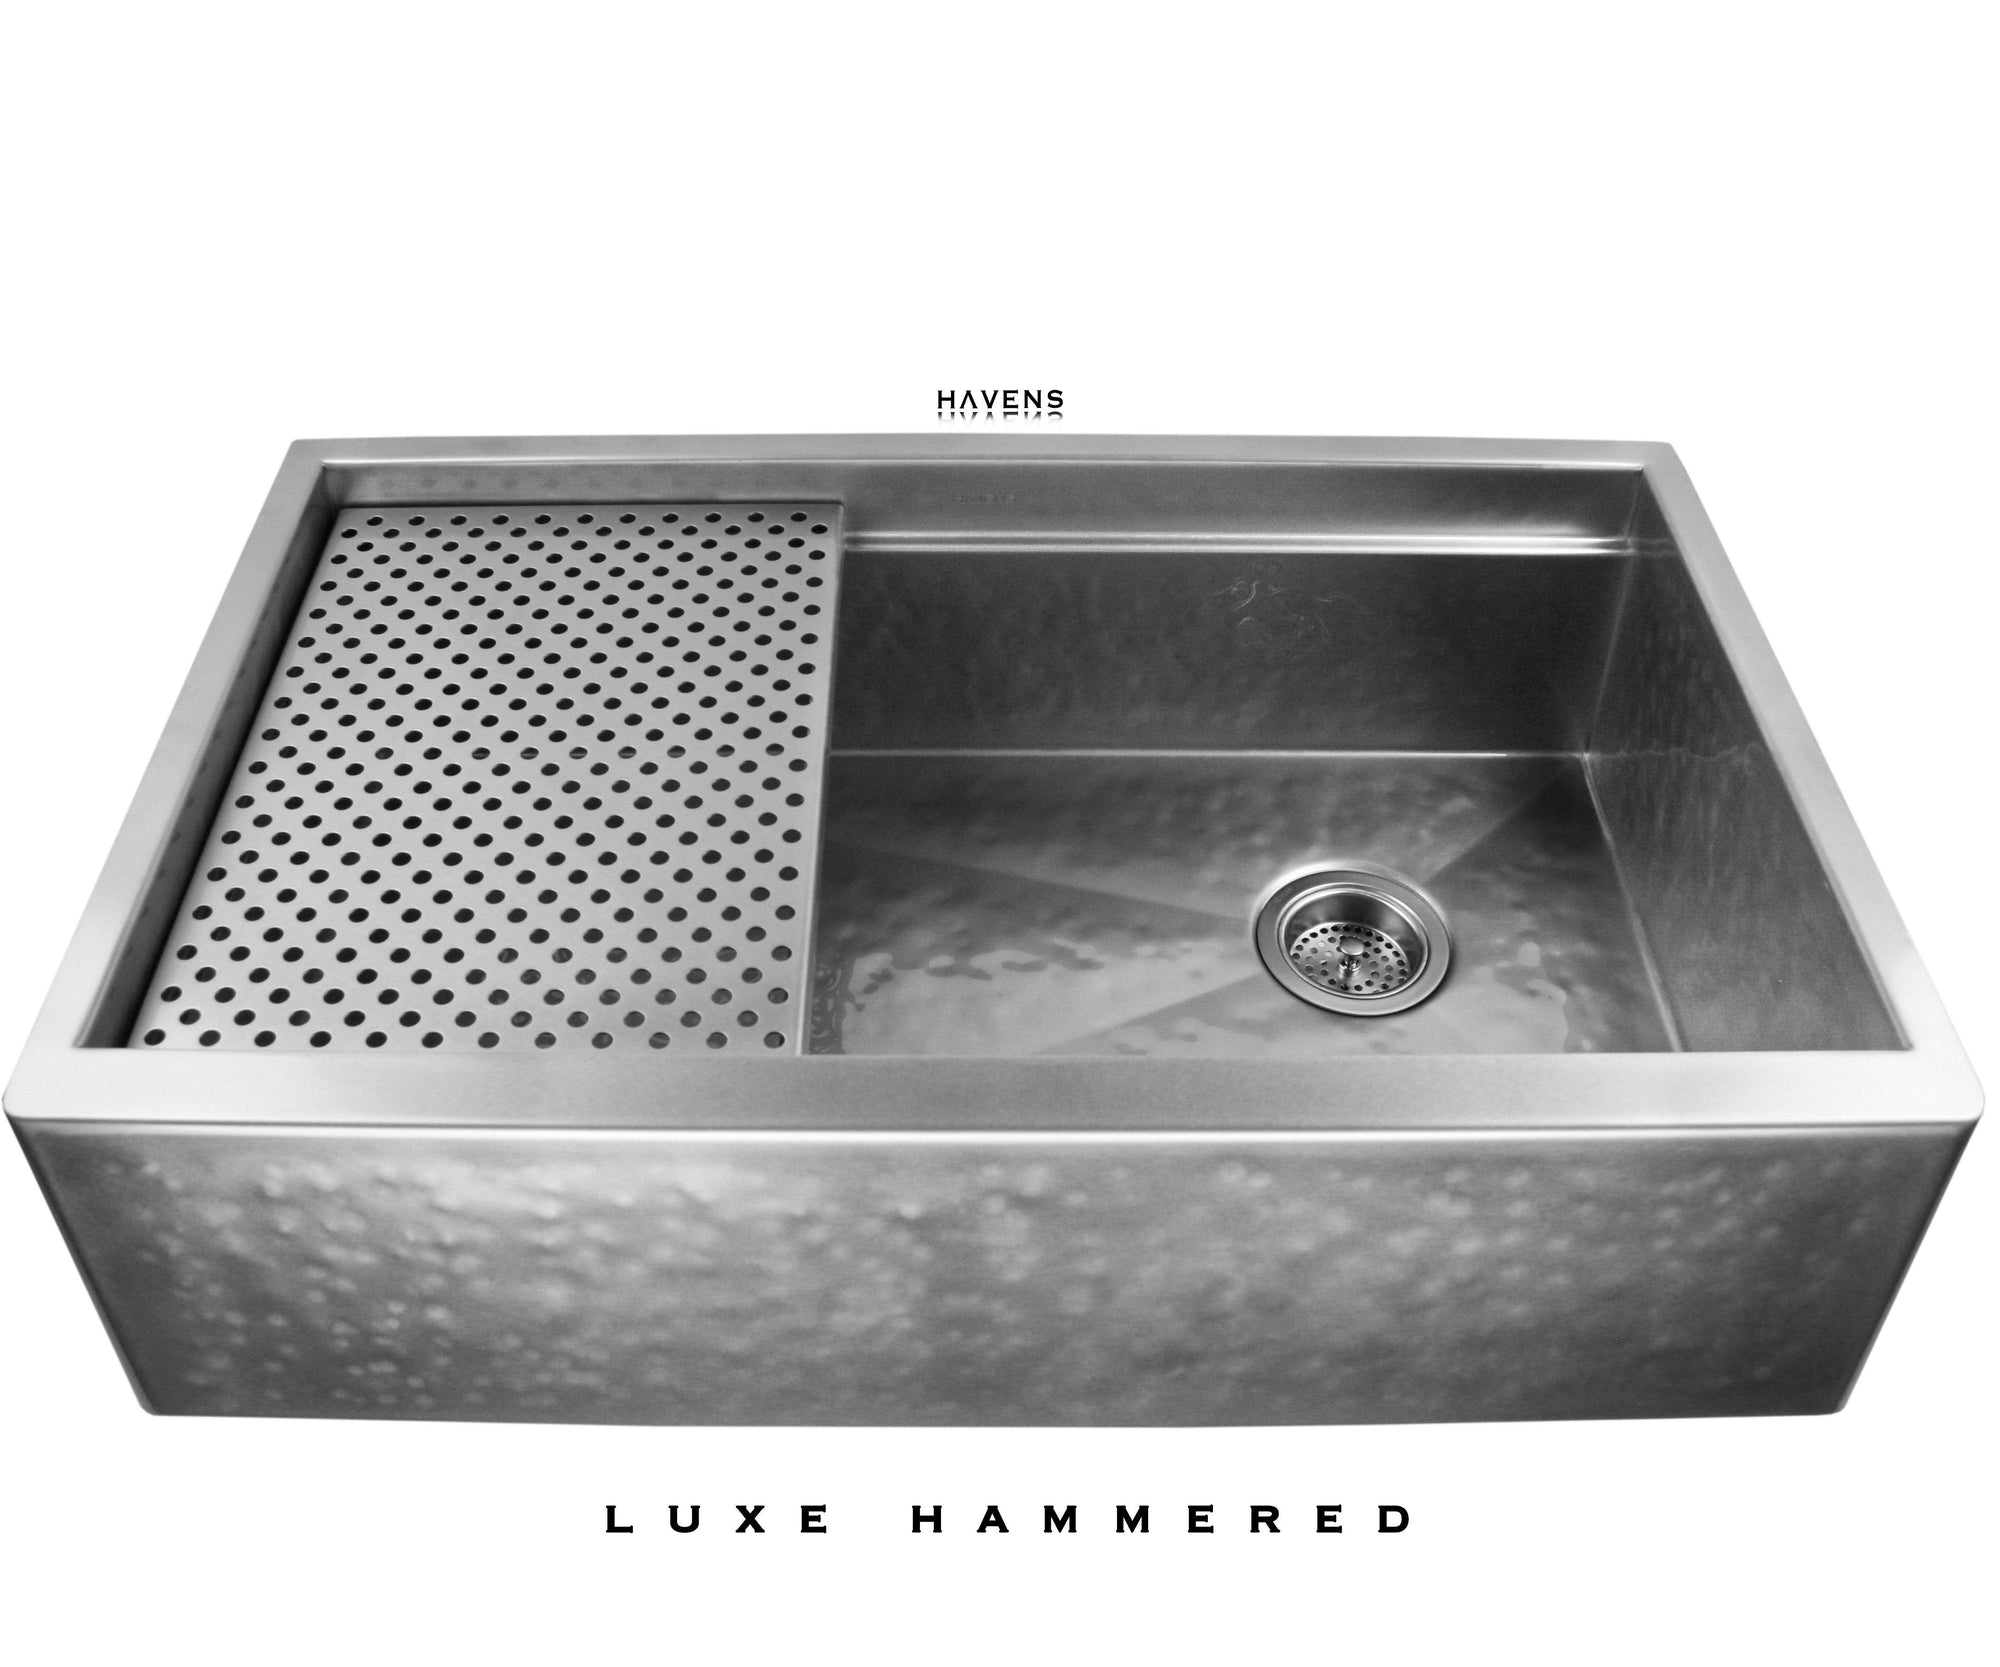 Matte hammered stainless steel farmhouse sink with a rustic appearance. Culinary workstation style sink with a built in ledge for accessories. 